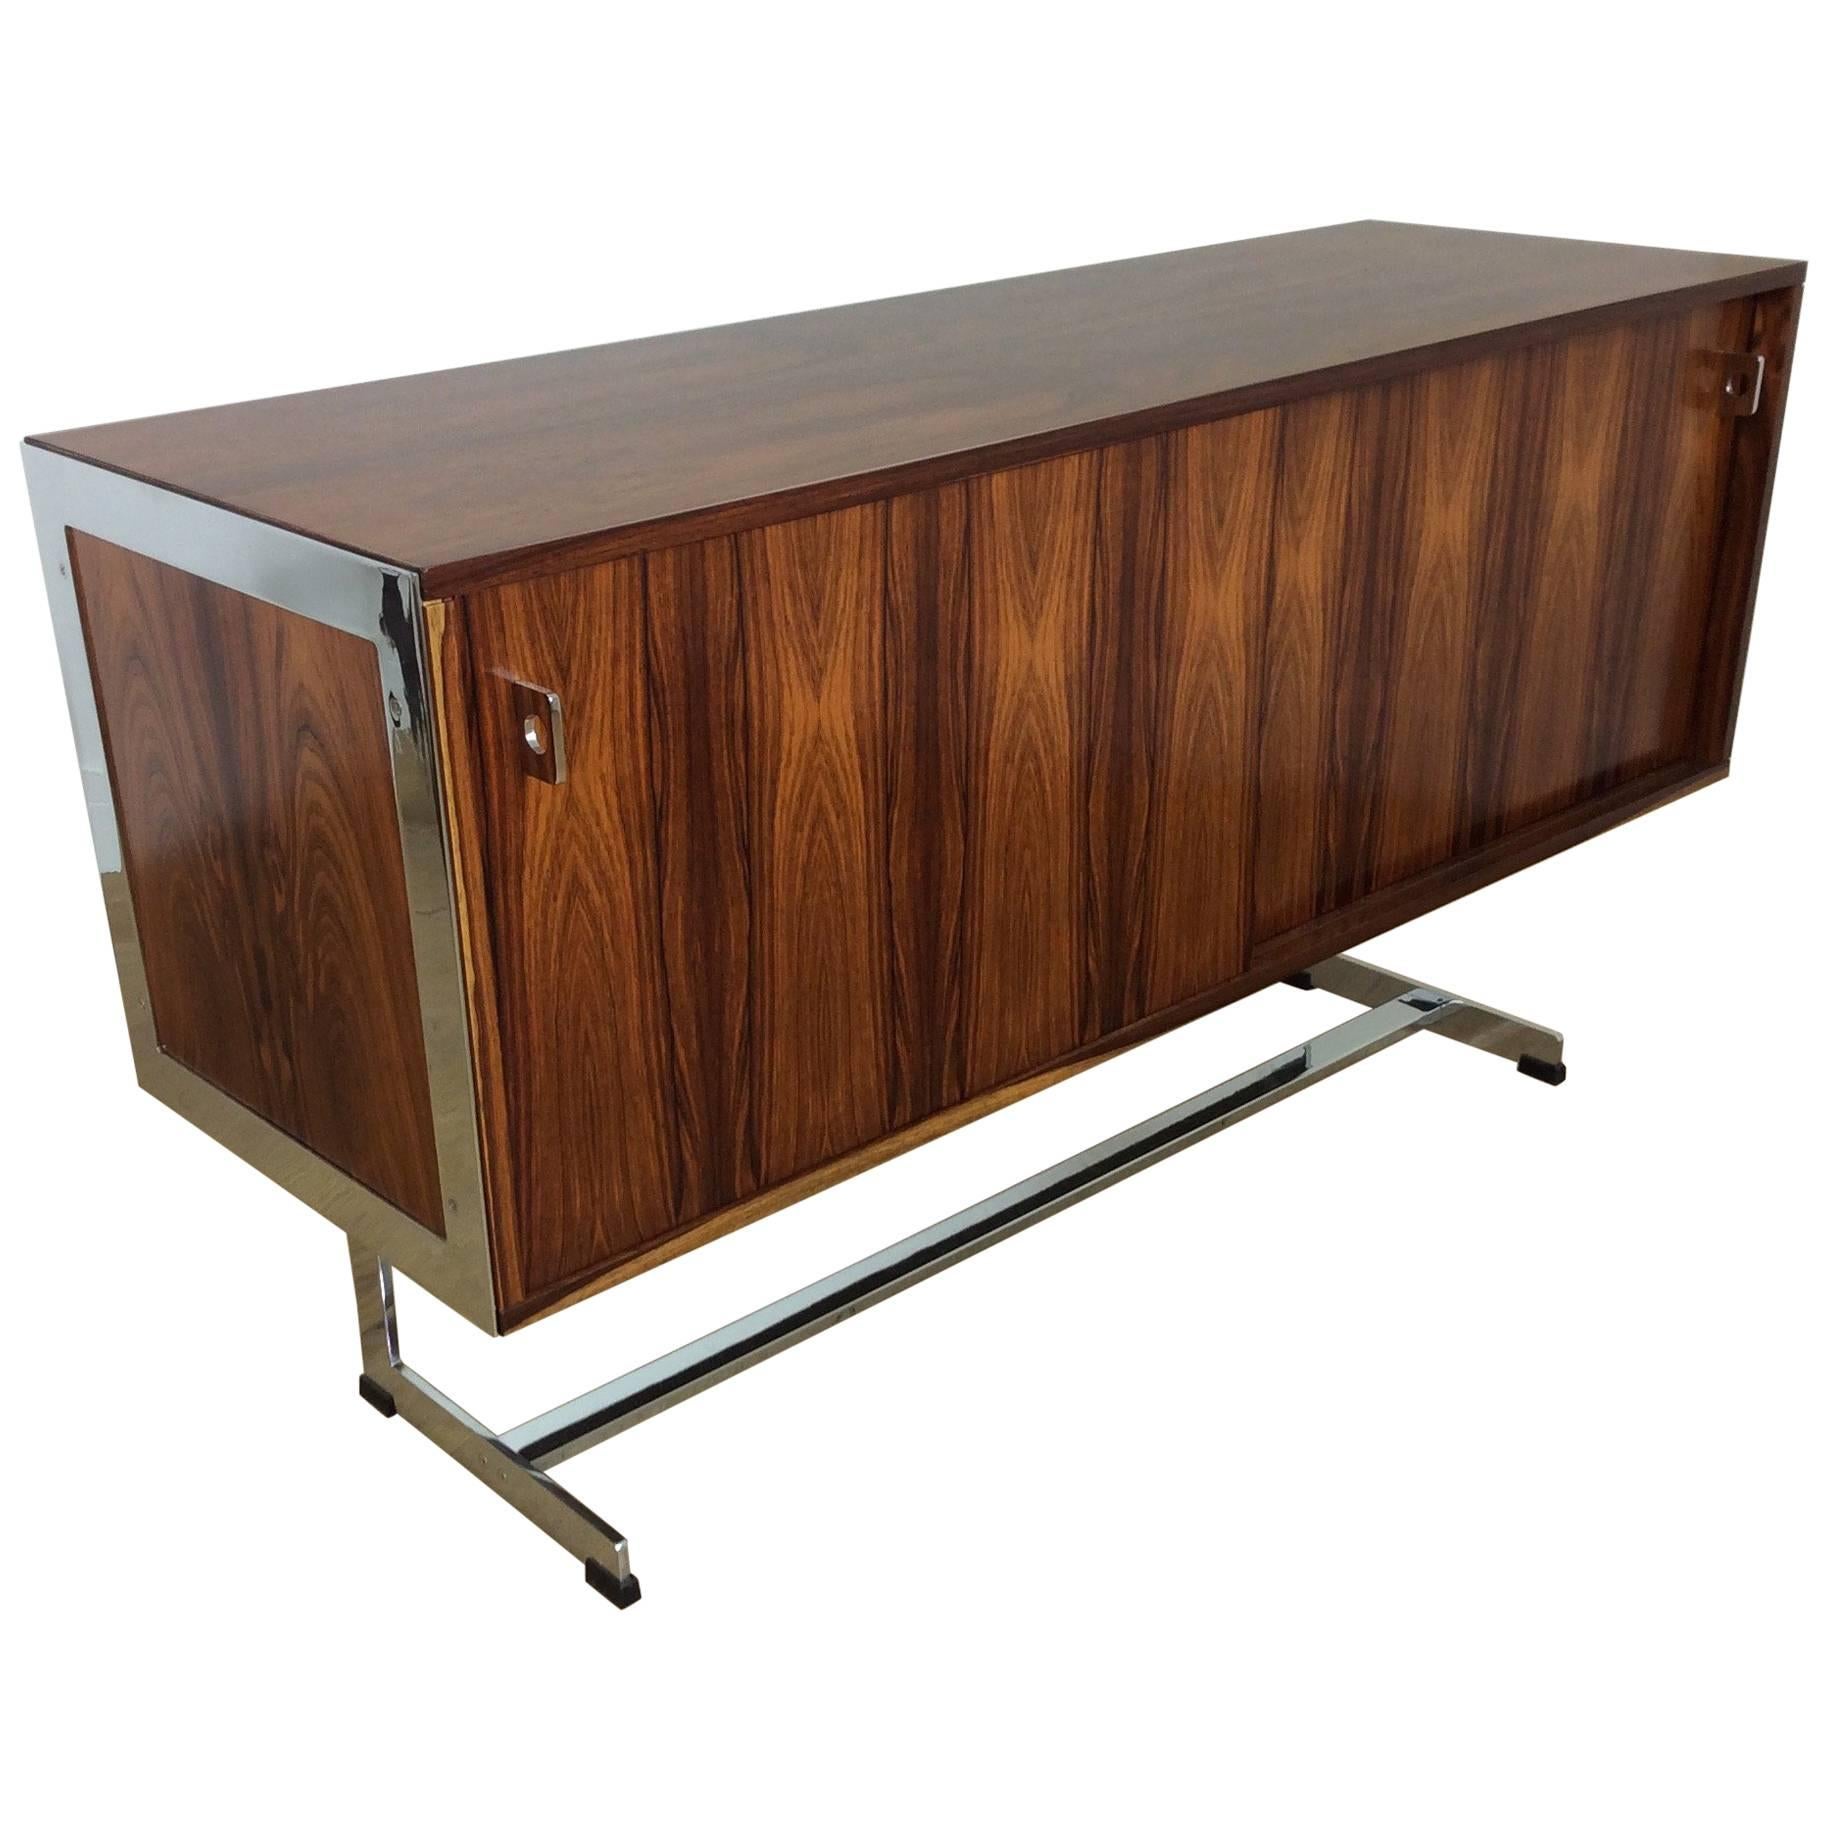 Midcentury Rosewood and Chrome Sideboard or Credenza by Merrow Associates